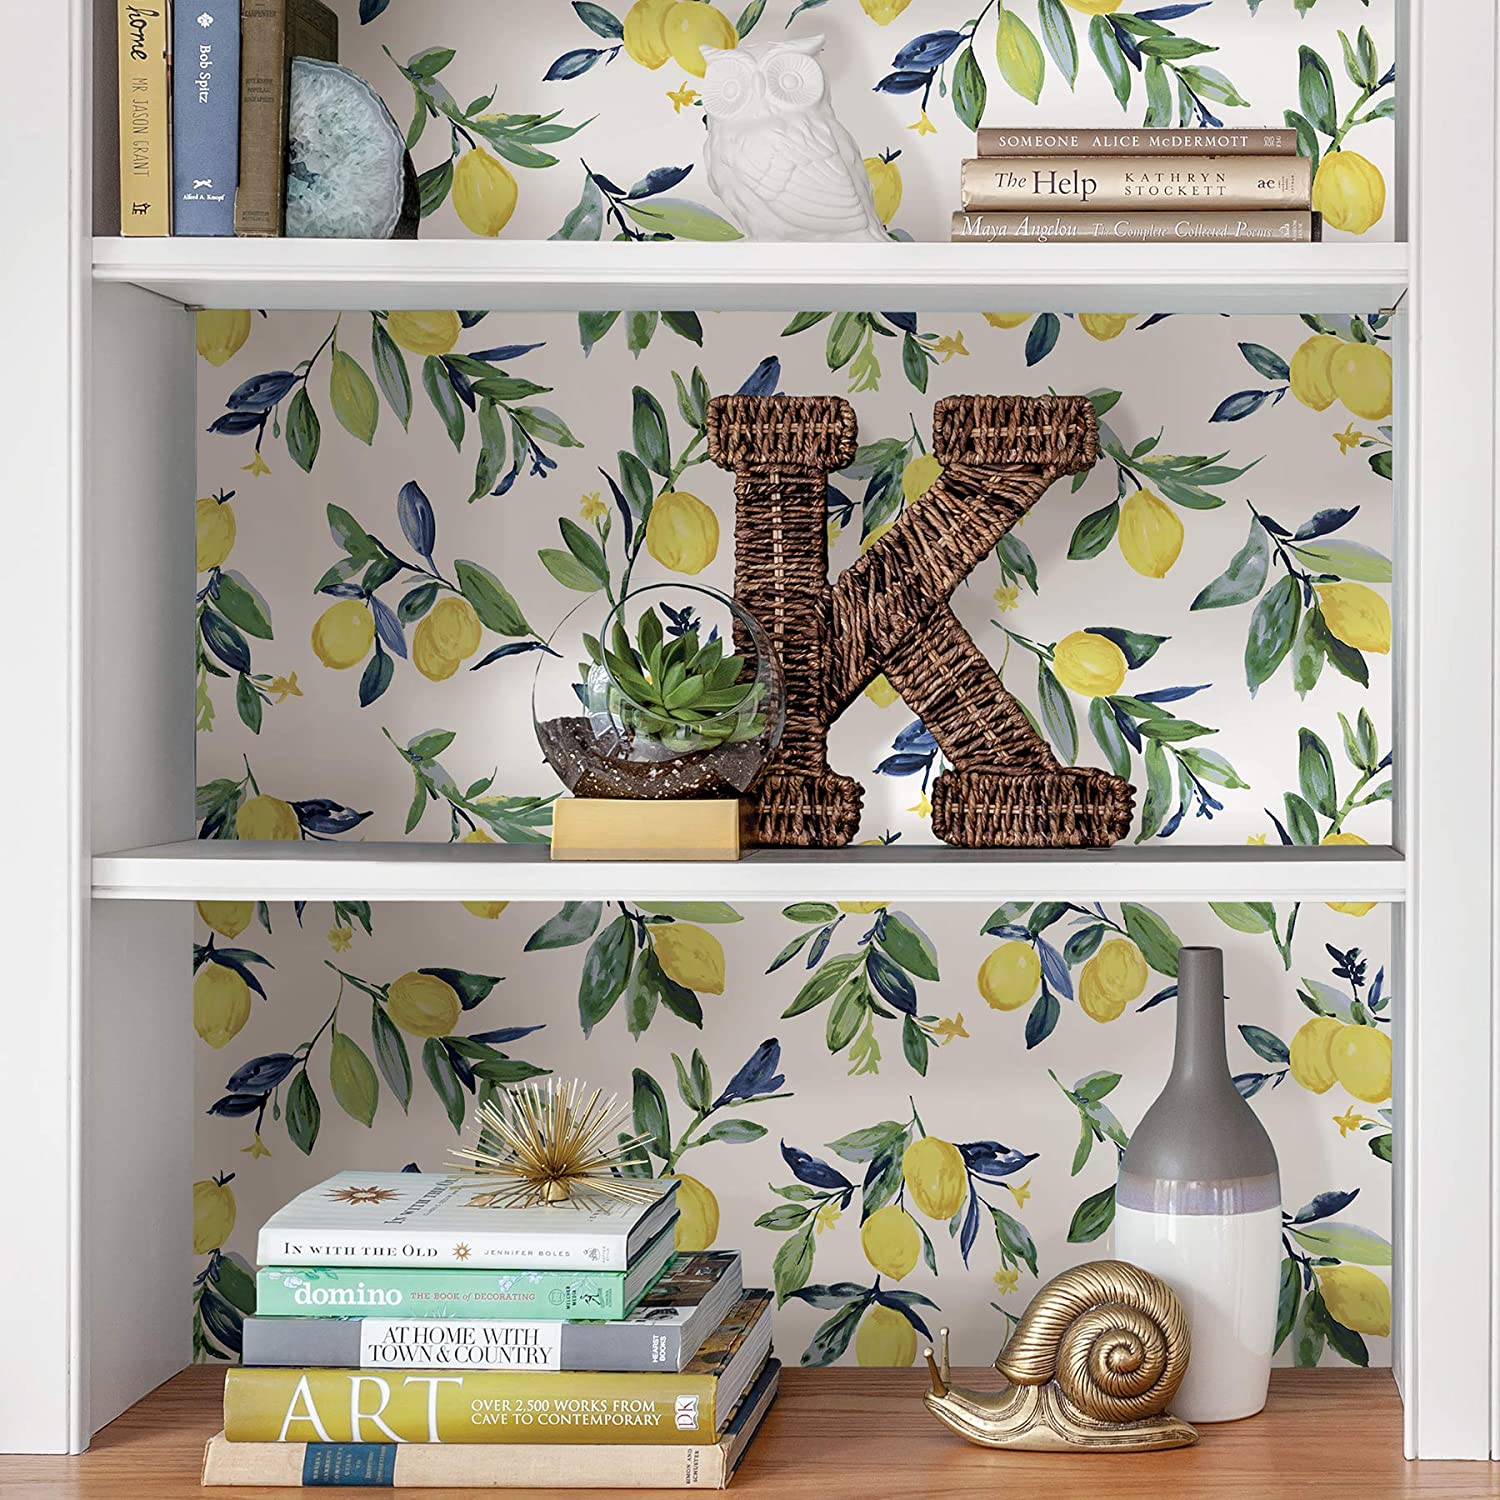 Make a cool statement with wallpaper behind the wall unit or bookcase